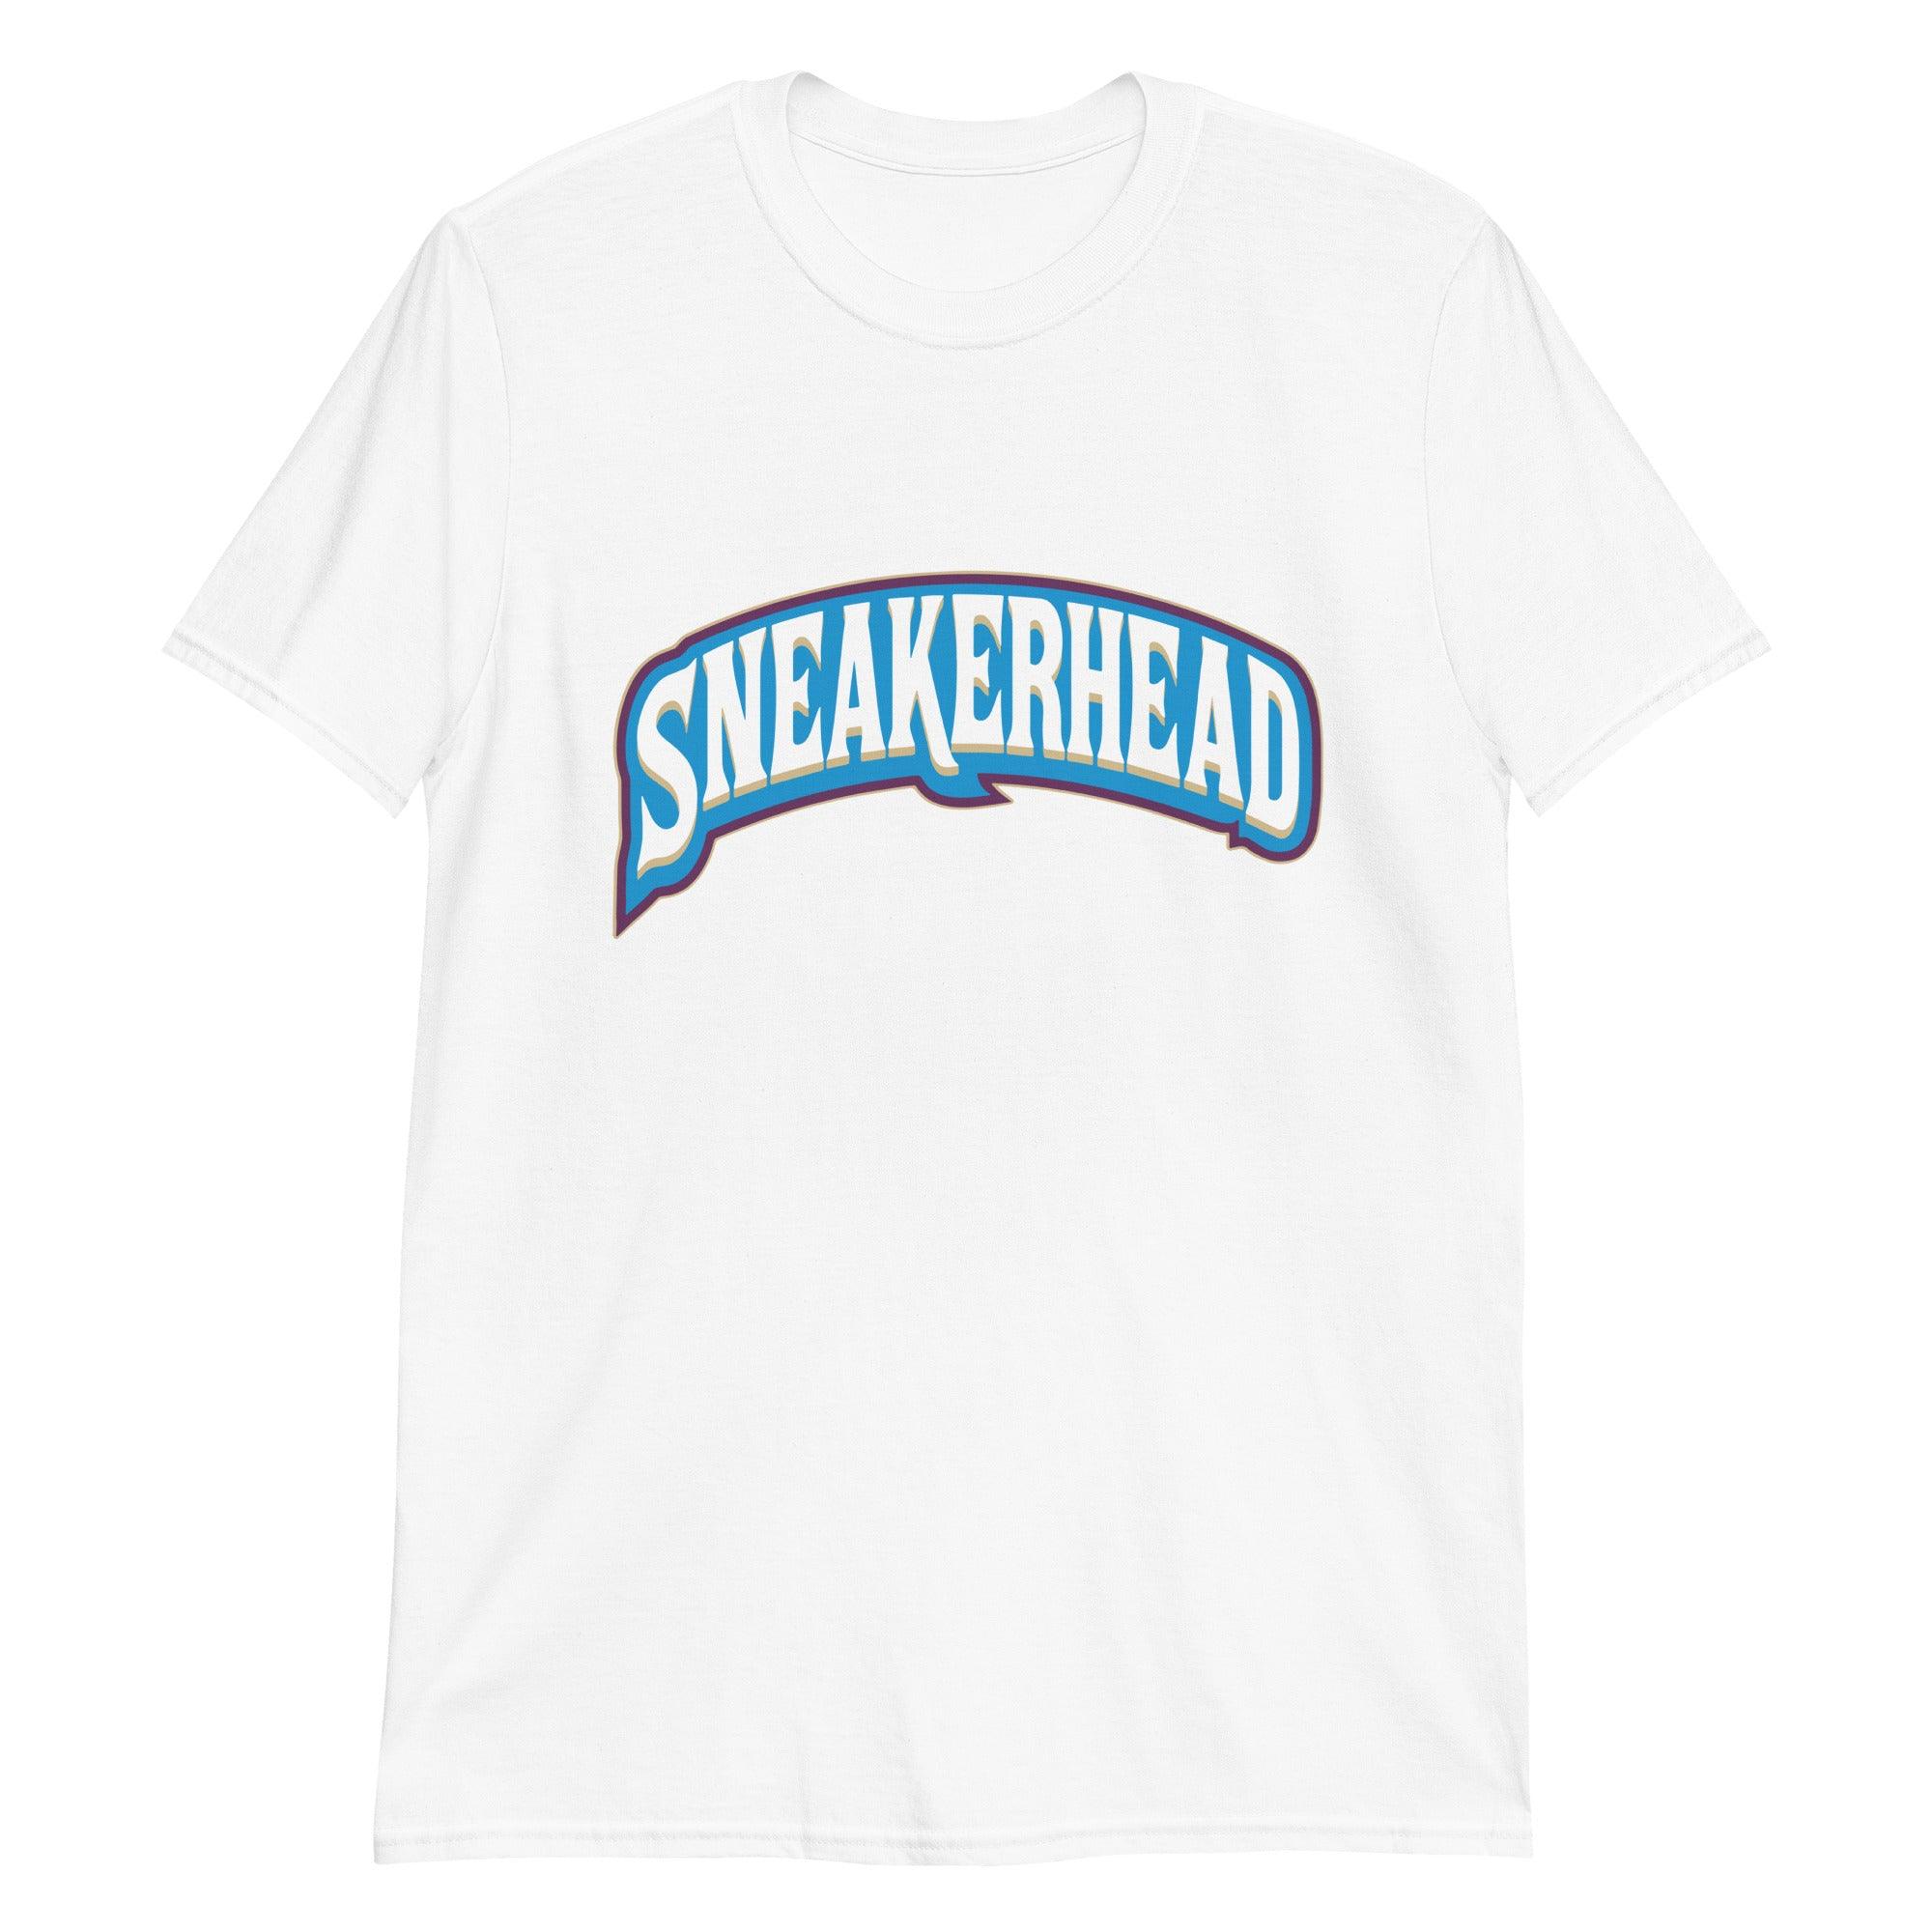 White Sneakerhead Shirt Dunk Low Undefeated 5 On It Dunk vs AF1 photo